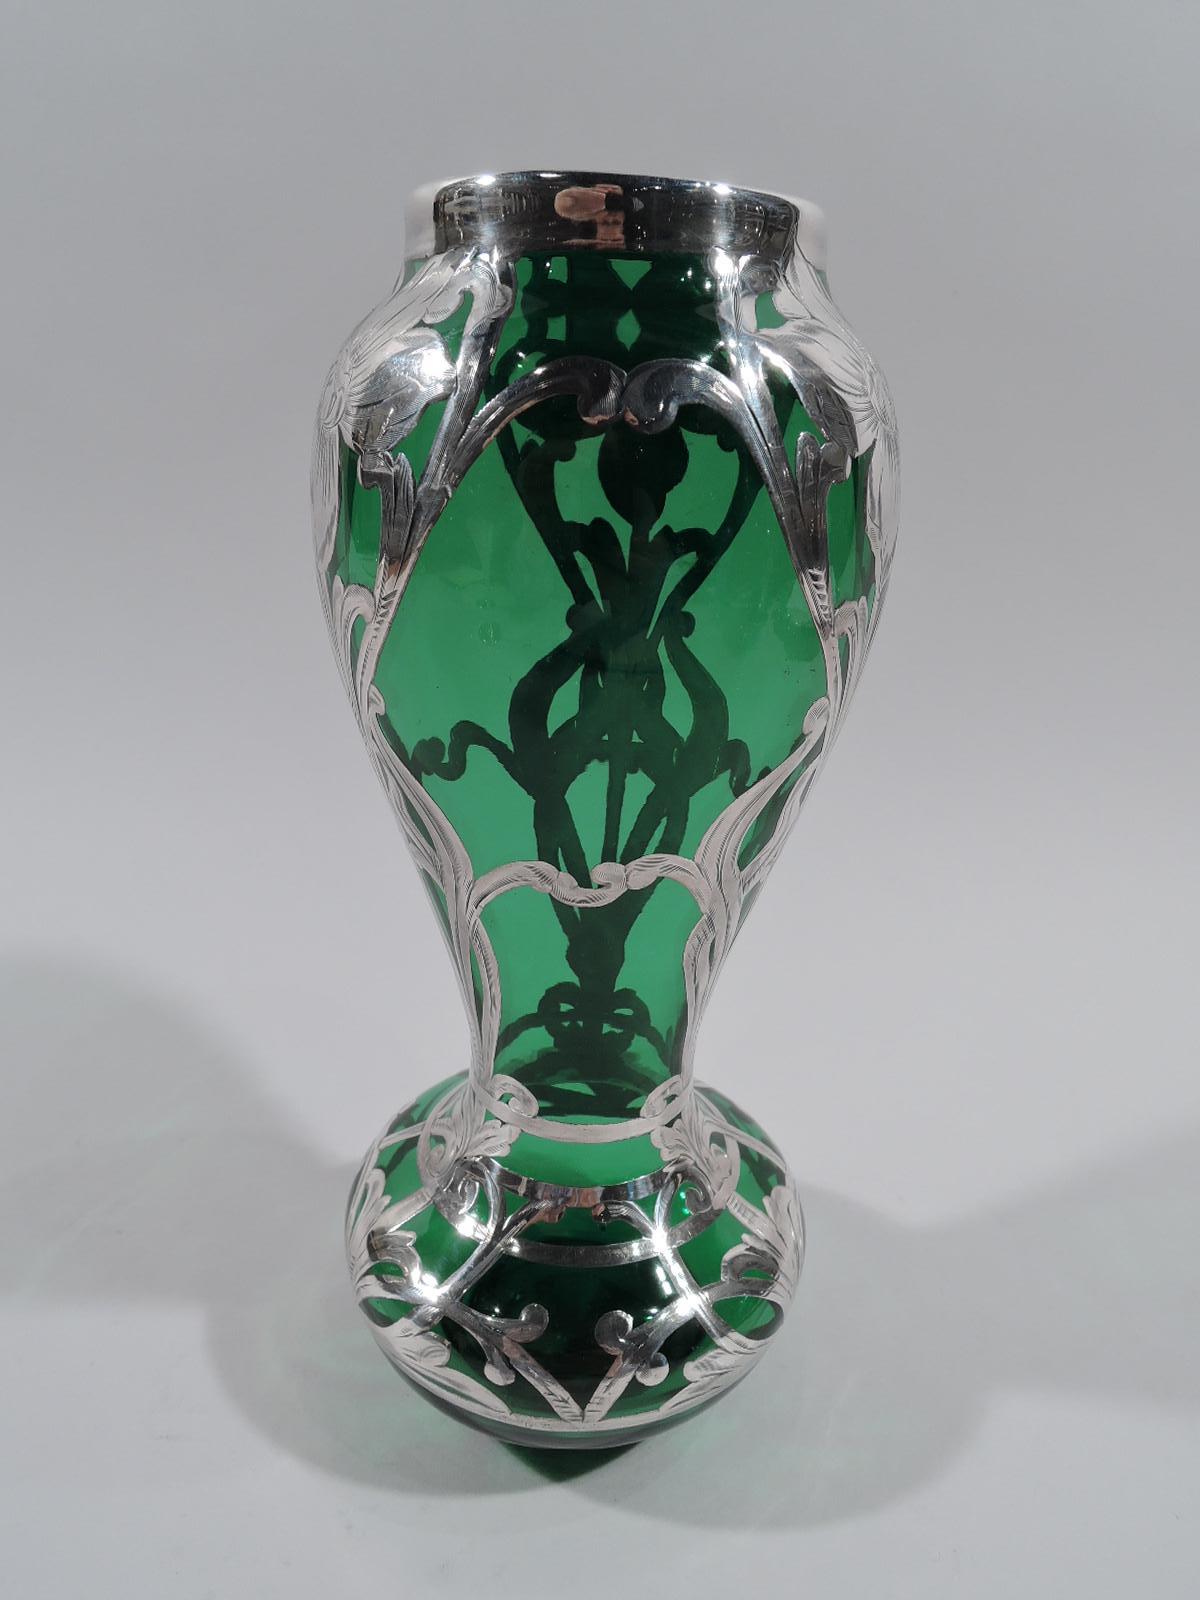 Turn-of-the-century American Art Nouveau glass vase with engraved silver overlay. Voluptuous baluster flowing into bellied bowl; short straight neck in silver collar and plain inset foot ring. Open overlay pattern comprising flowers with interlaced